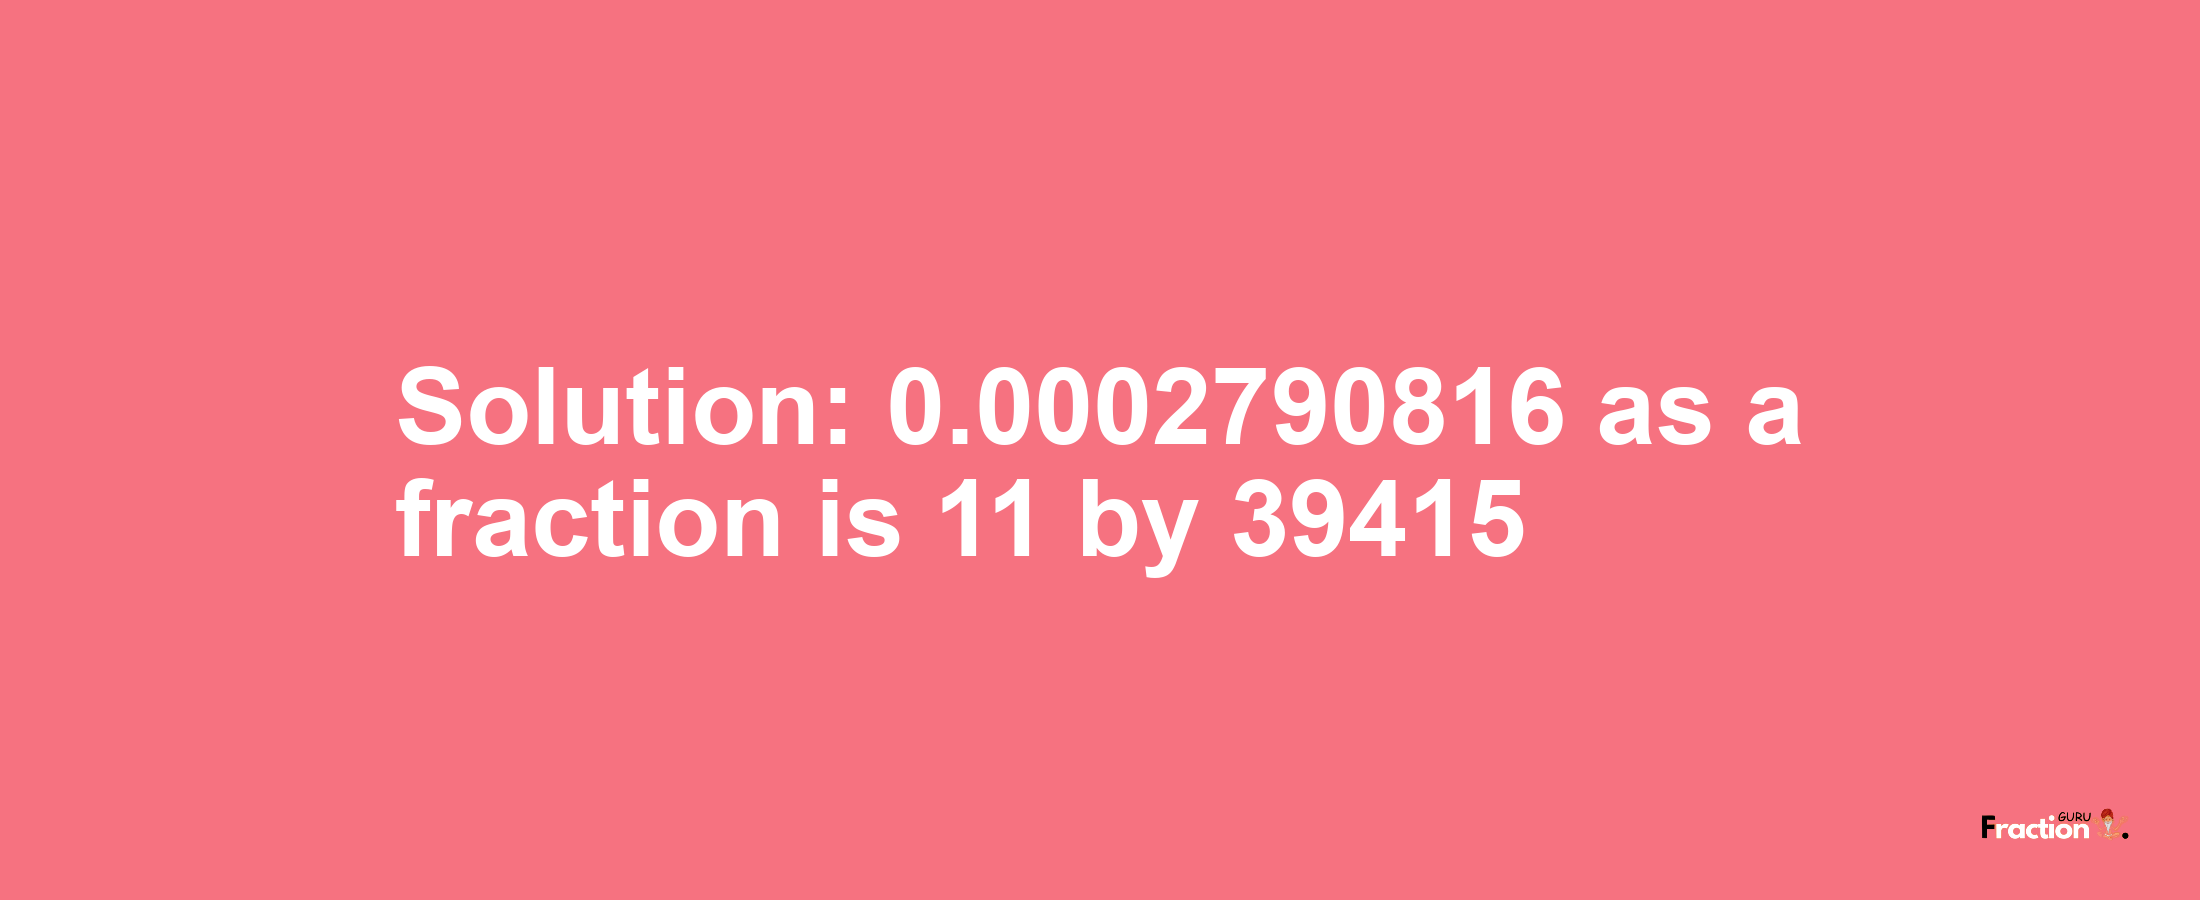 Solution:0.0002790816 as a fraction is 11/39415